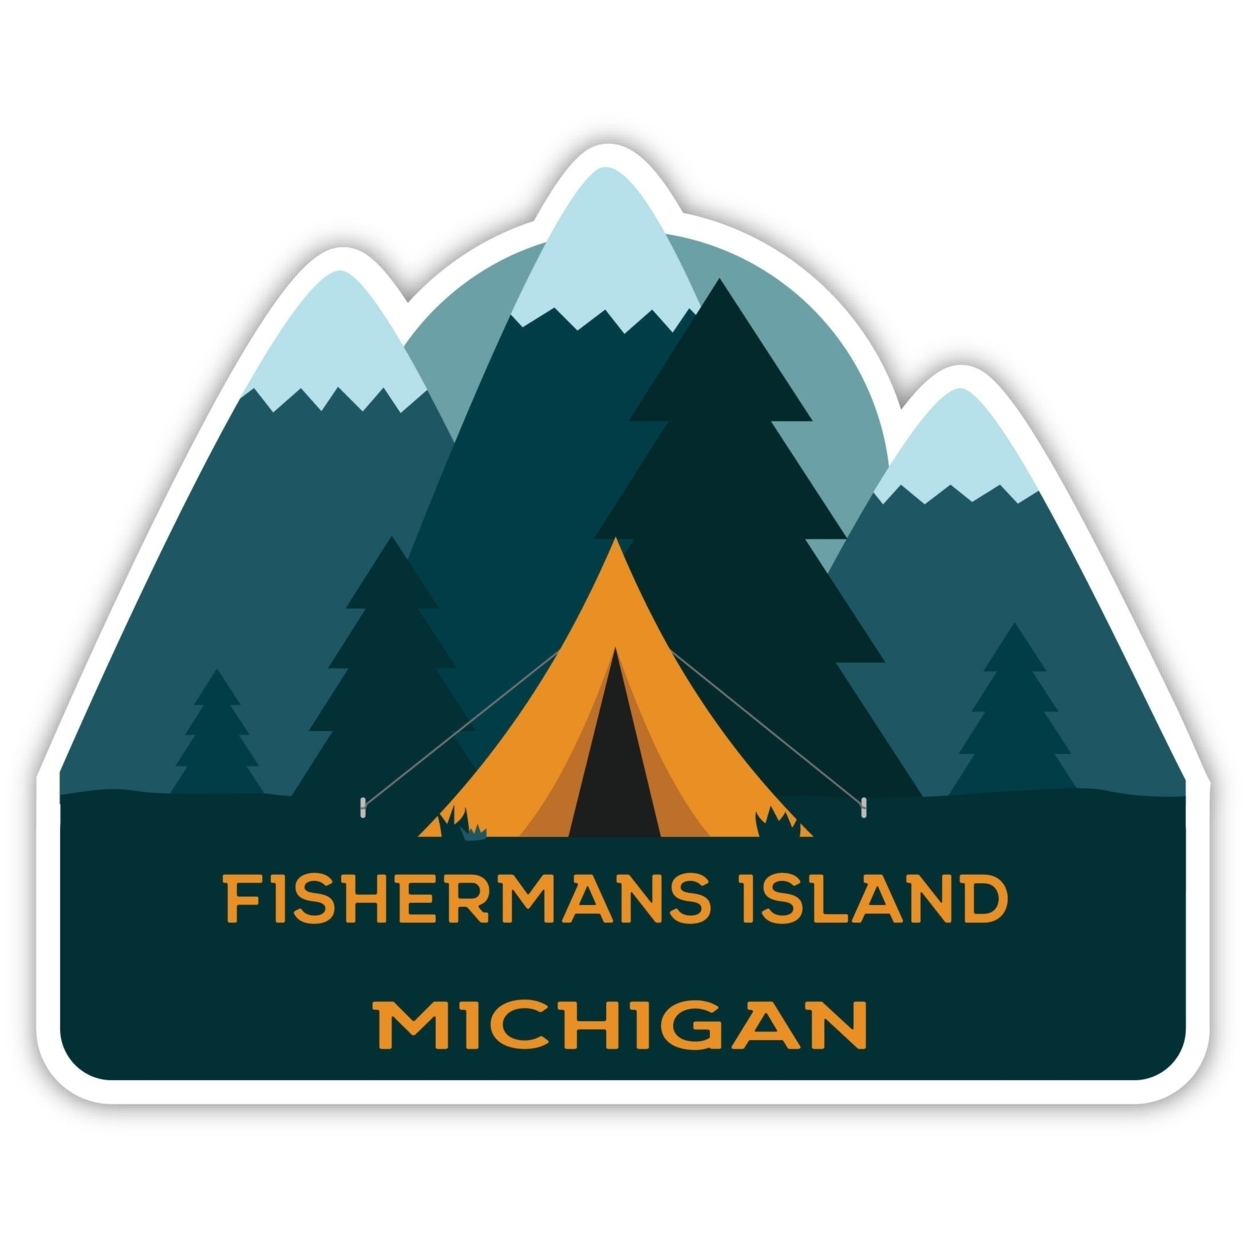 Fishermans Island Michigan Souvenir Decorative Stickers (Choose Theme And Size) - 4-Pack, 2-Inch, Tent